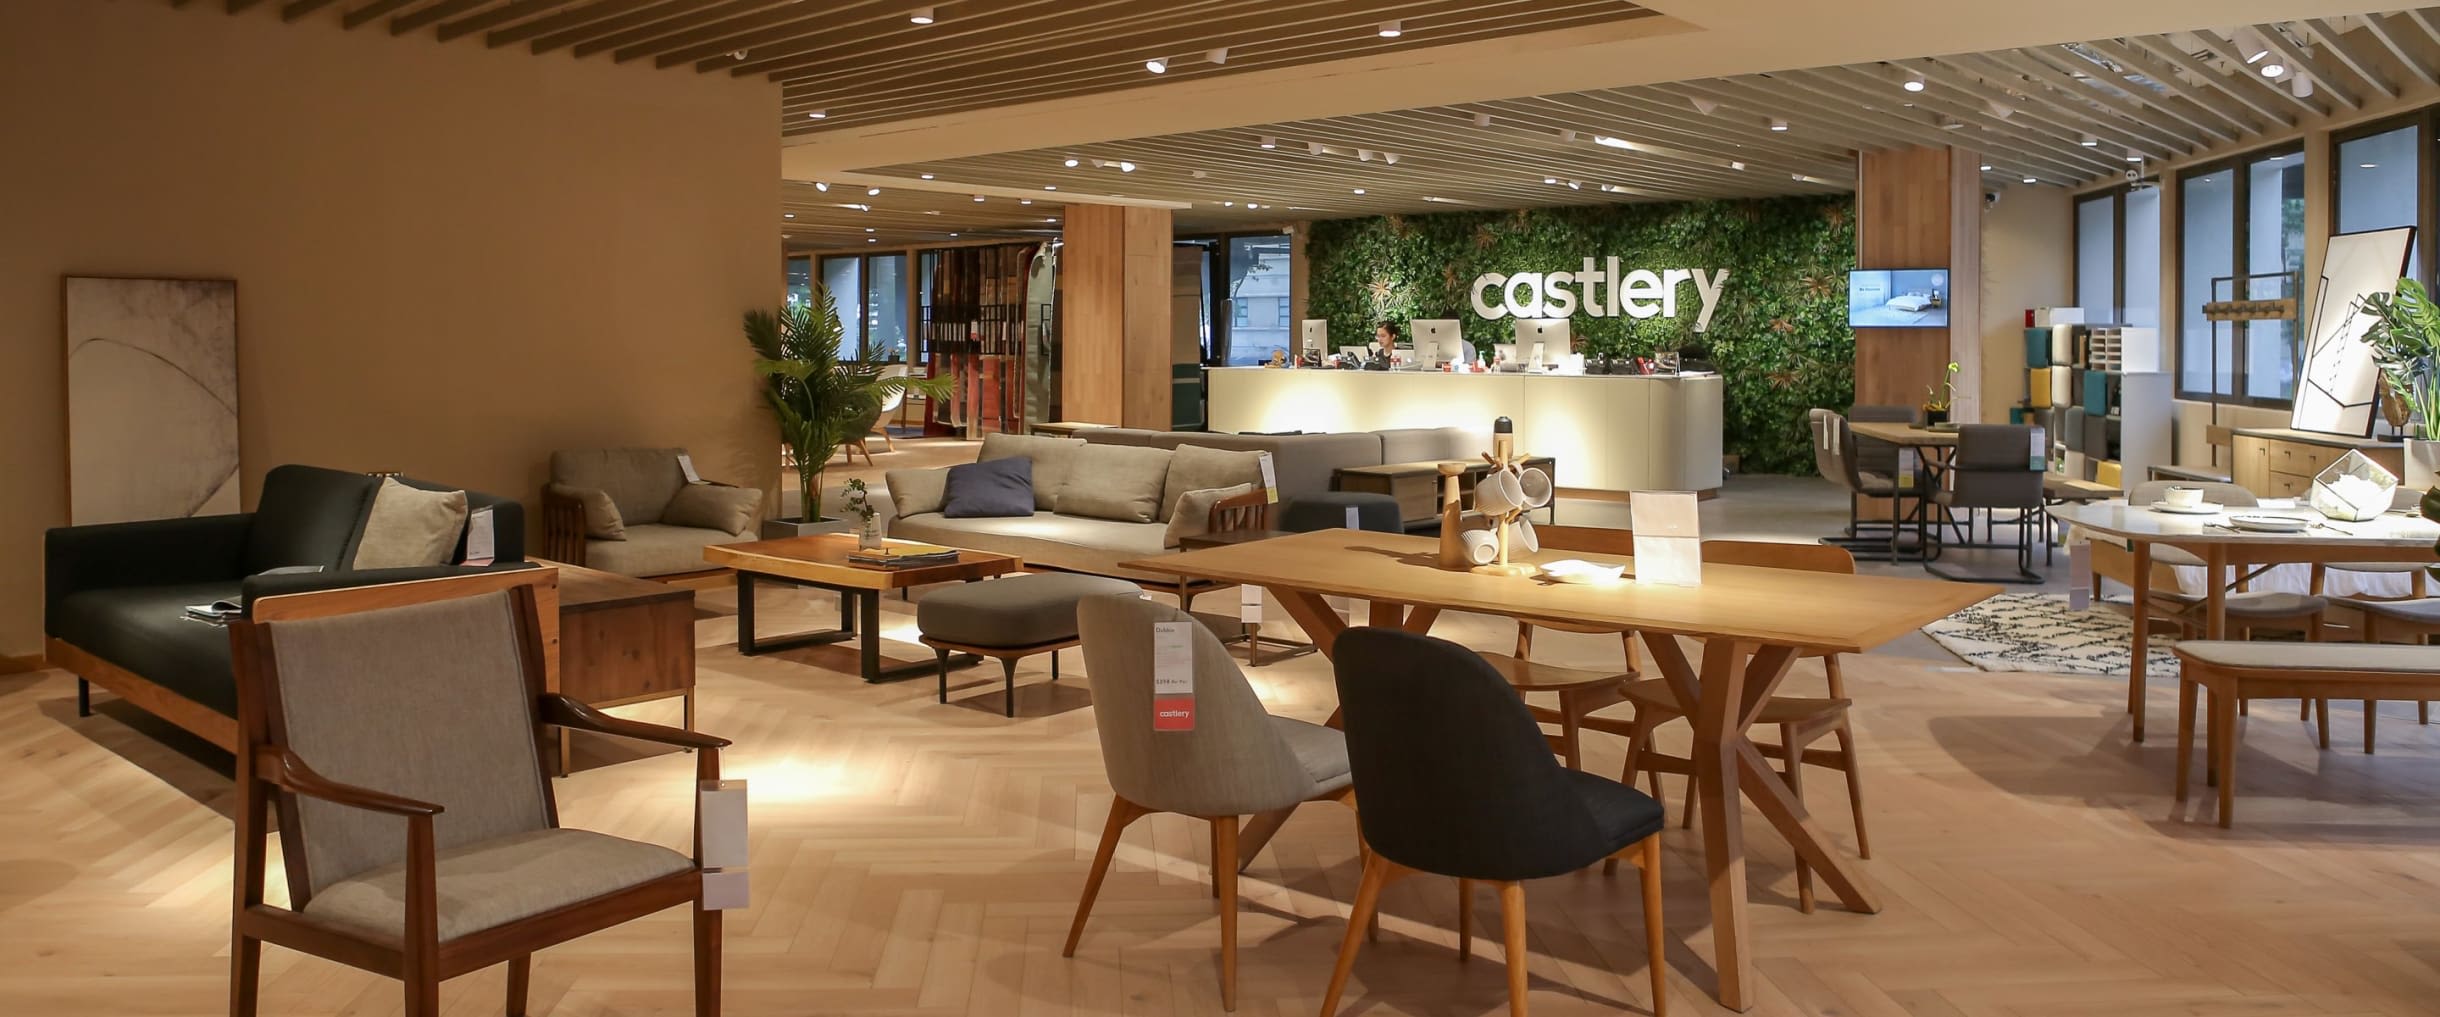 Castlery accepts in-person and online payments with Stripe, expands to the  US